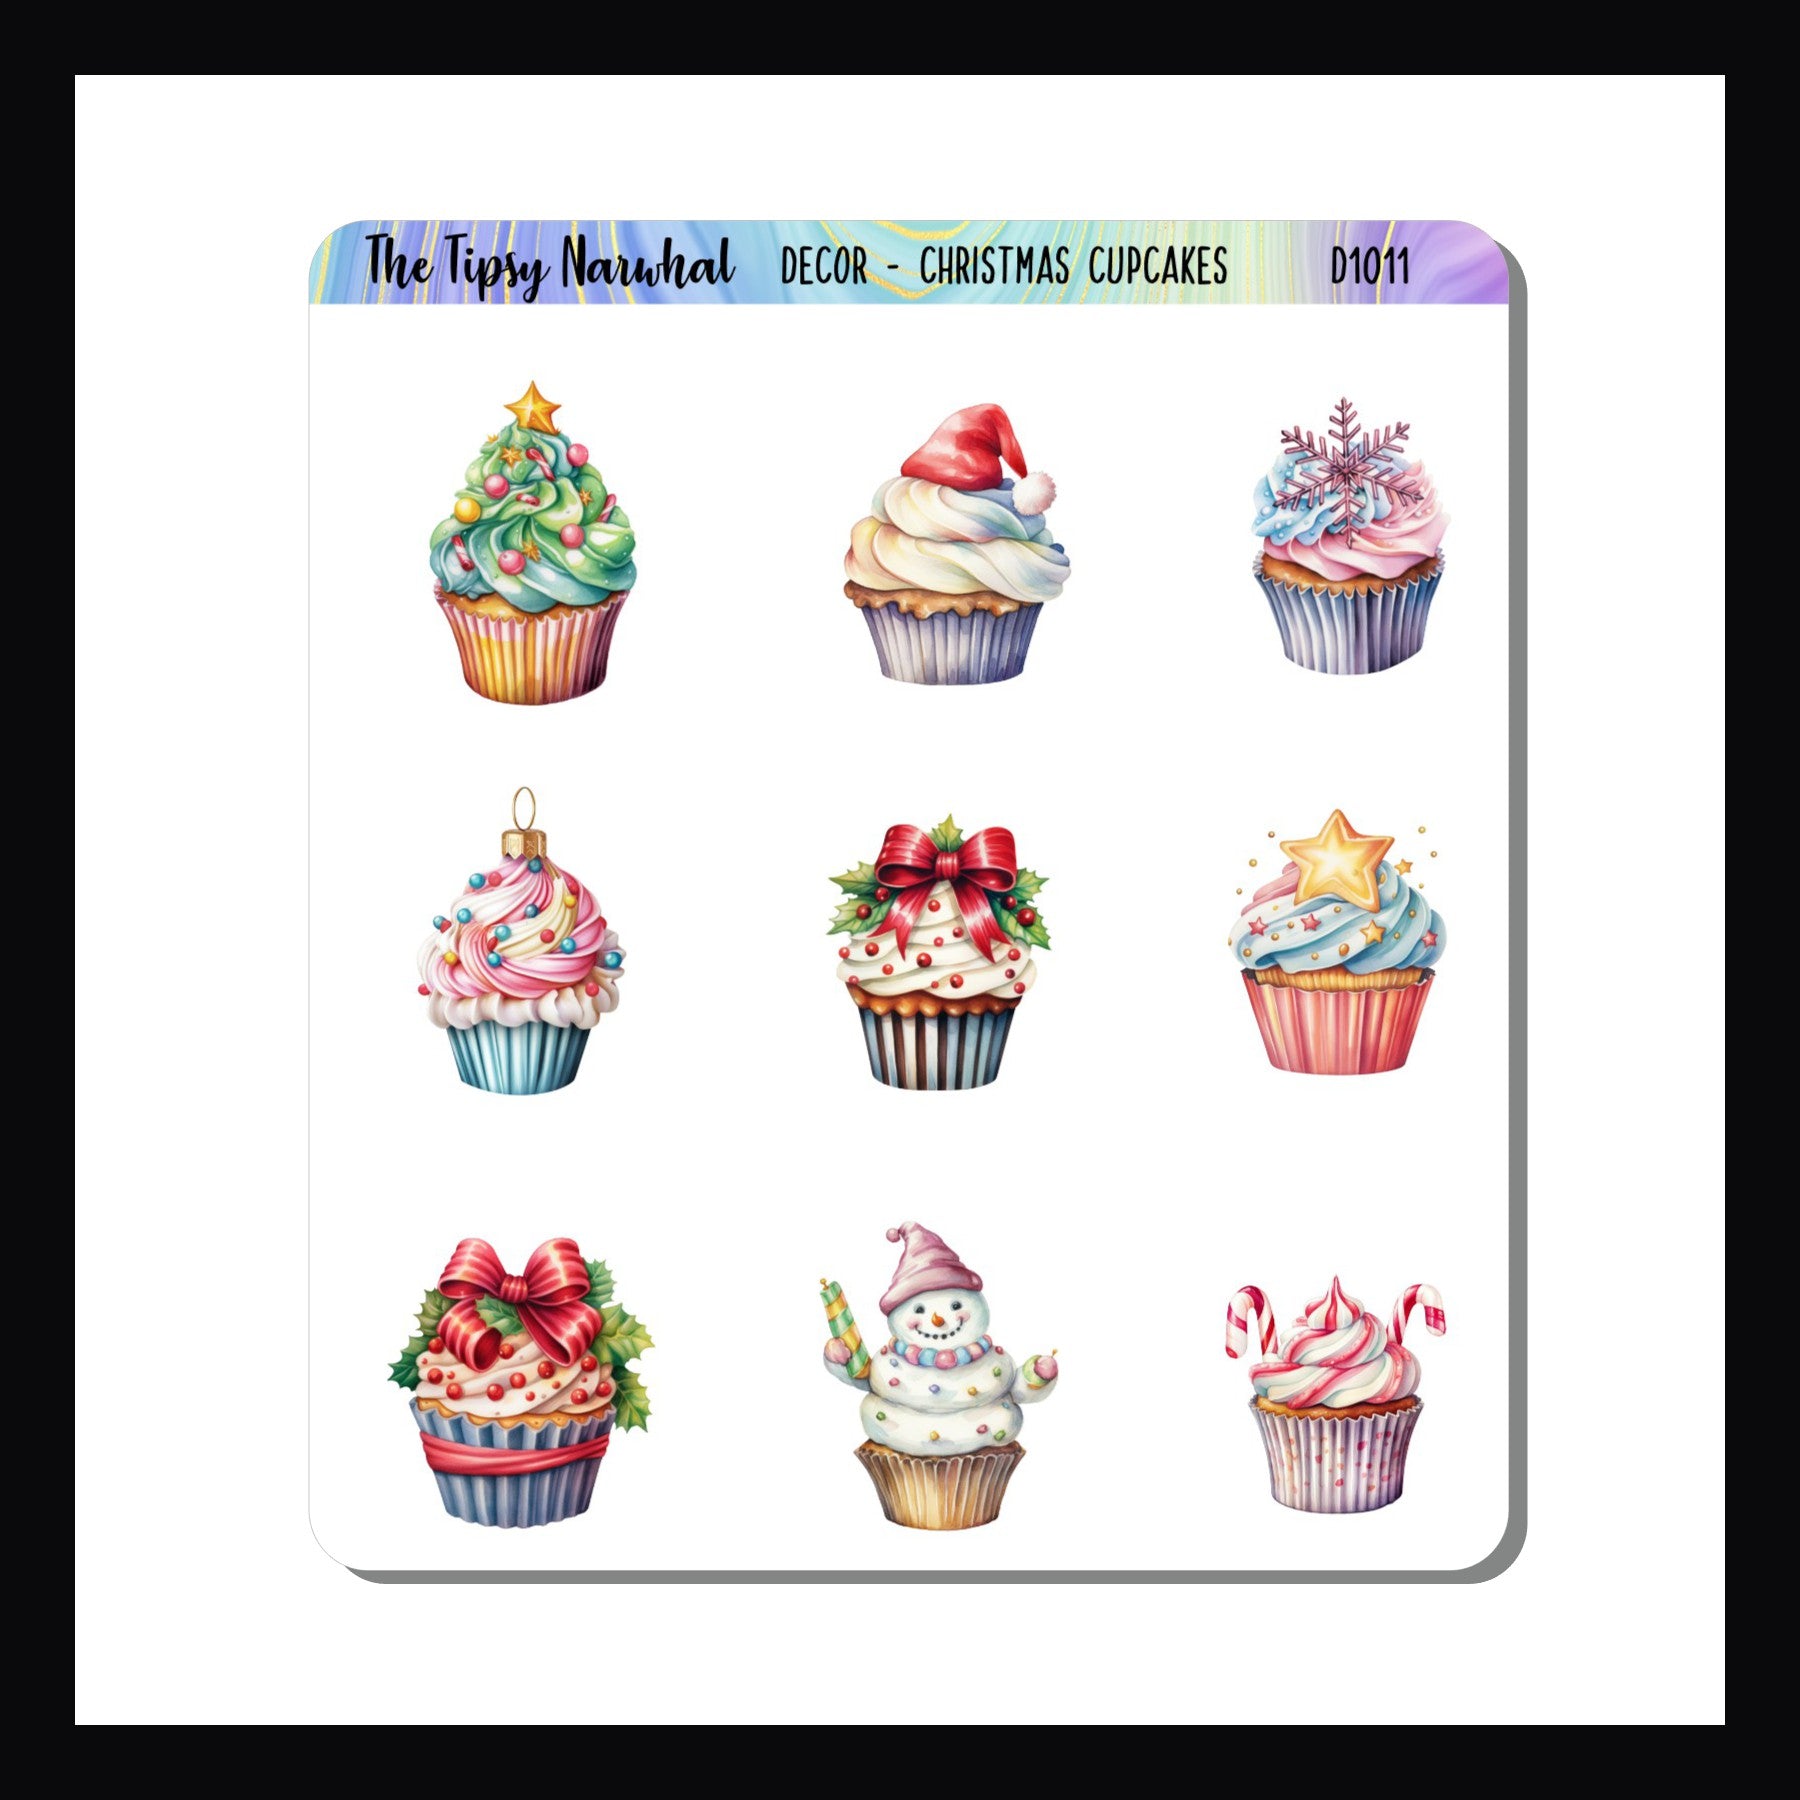 Christmas Cupcakes Stickers, christmas trees, Santa hat, snowflakes, stars, snowmen, peppermint, ribbons, holly, cupcakes, planner stickers, journal stickers